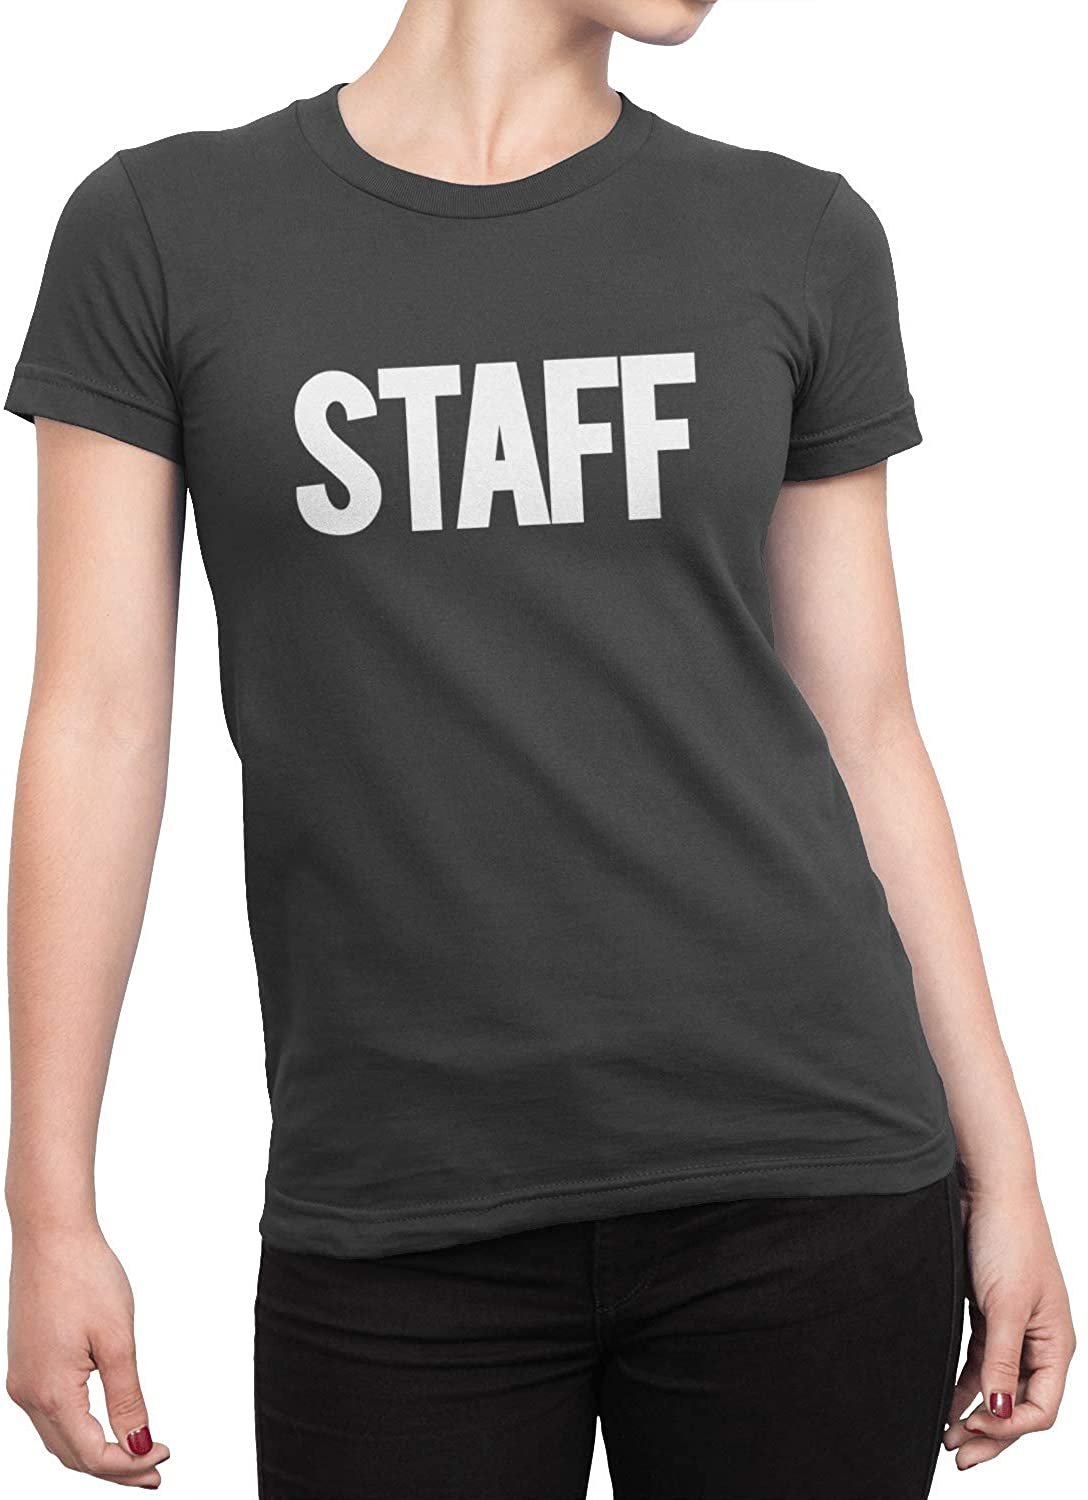 Staff Ladies Short Sleeve T-Shirt (Solid Design, Charcoal)